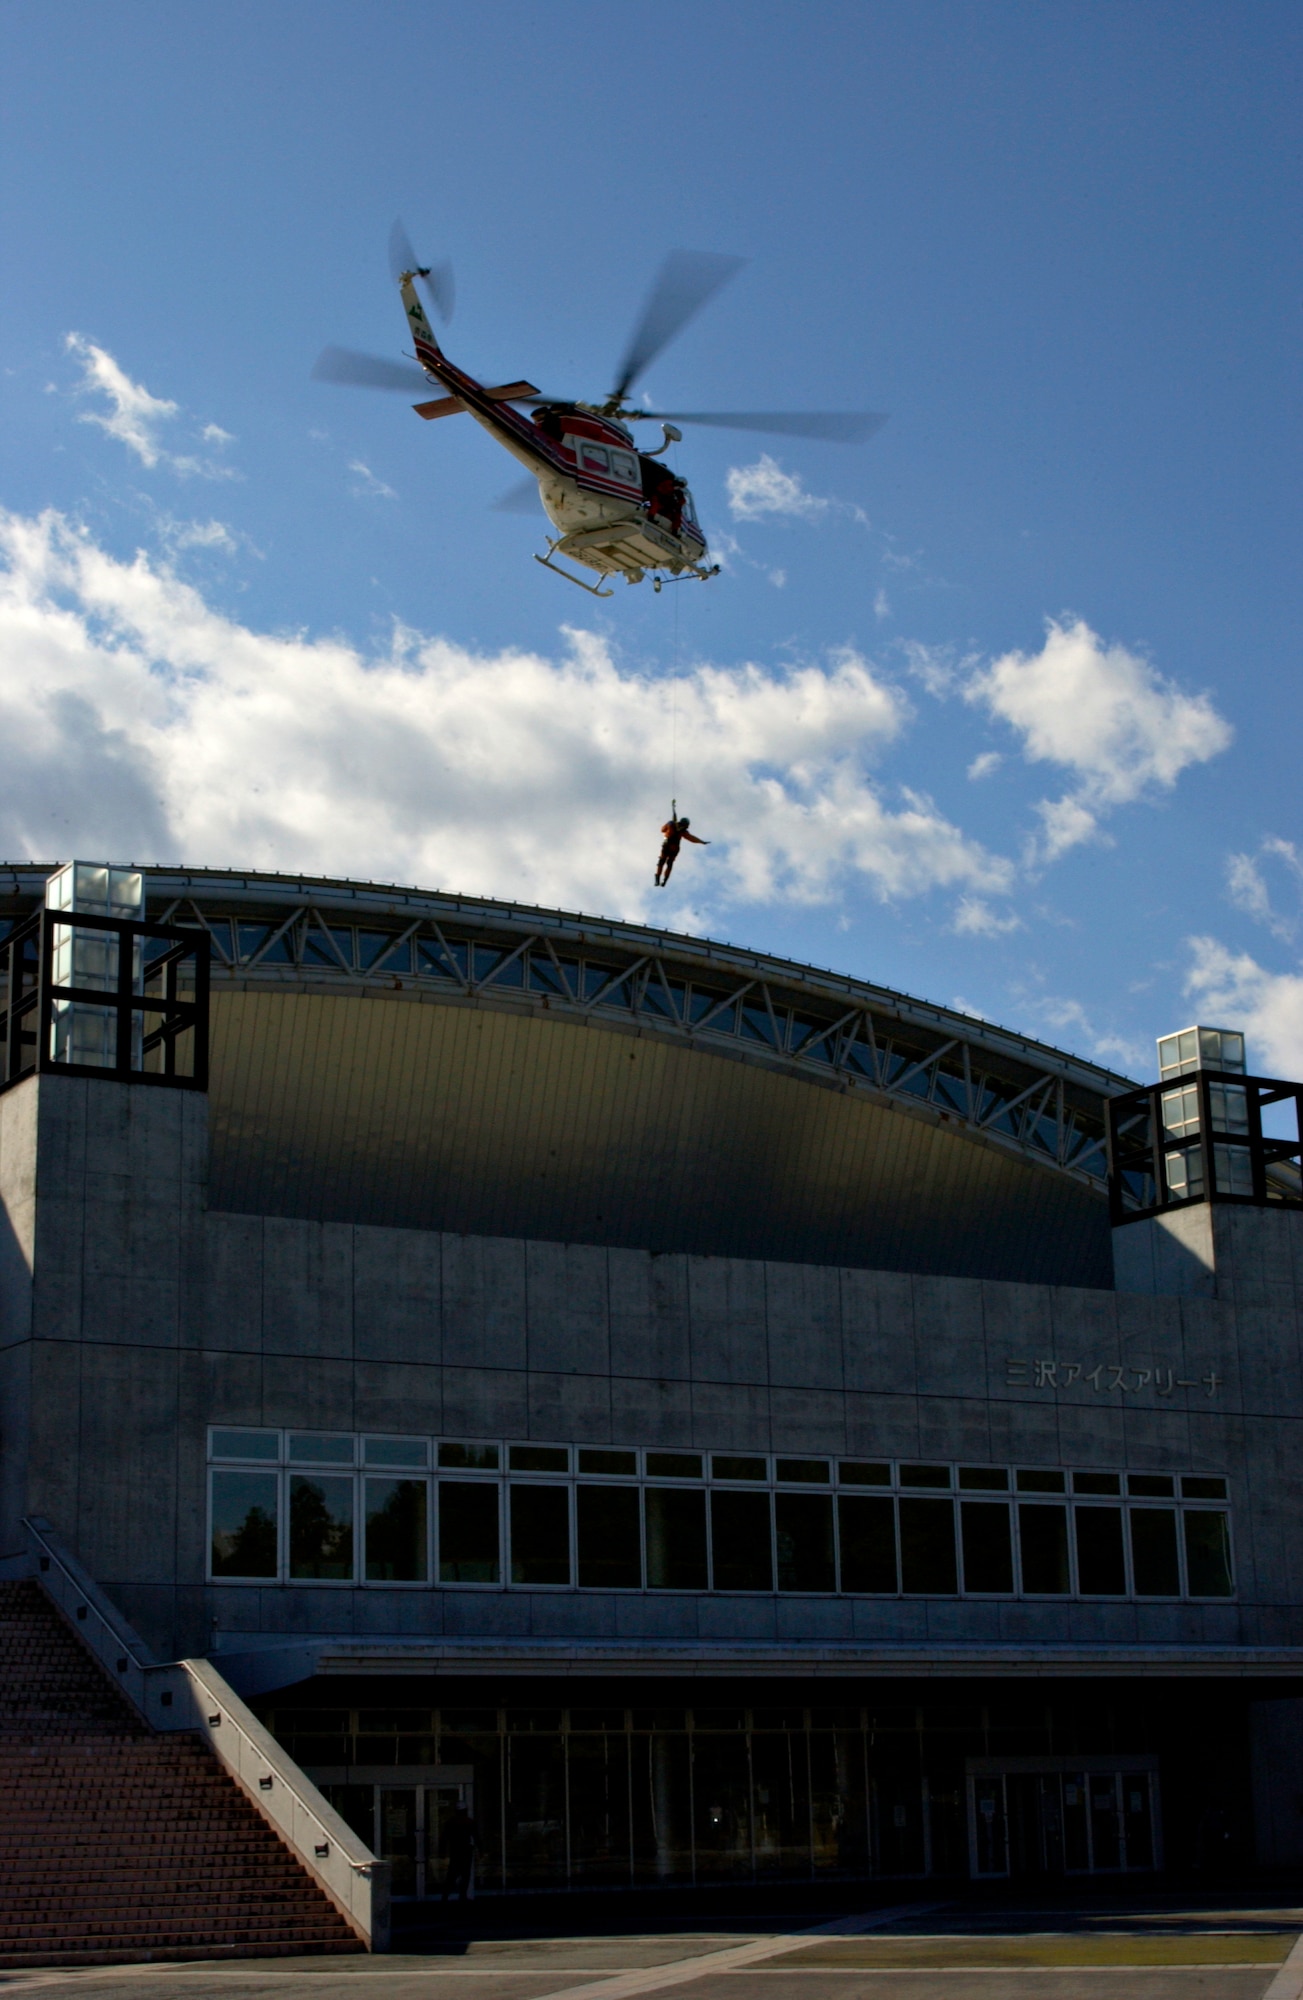 MISAWA AIR BASE, Japan -- A helicopter from the Aomori Prefecture Disaster Preparedness Air Center lowers a rescue worker to retrieve a victim from the roof of the Misawa Ice Arena as part of the Misawa City Disaster Preparation Exercise Oct. 14, 2007. The exercise involved personnel from Misawa City as well as Misawa Air Base.
(US Air Force photo by Airman 1st Class Eric Harris)(RELEASED)